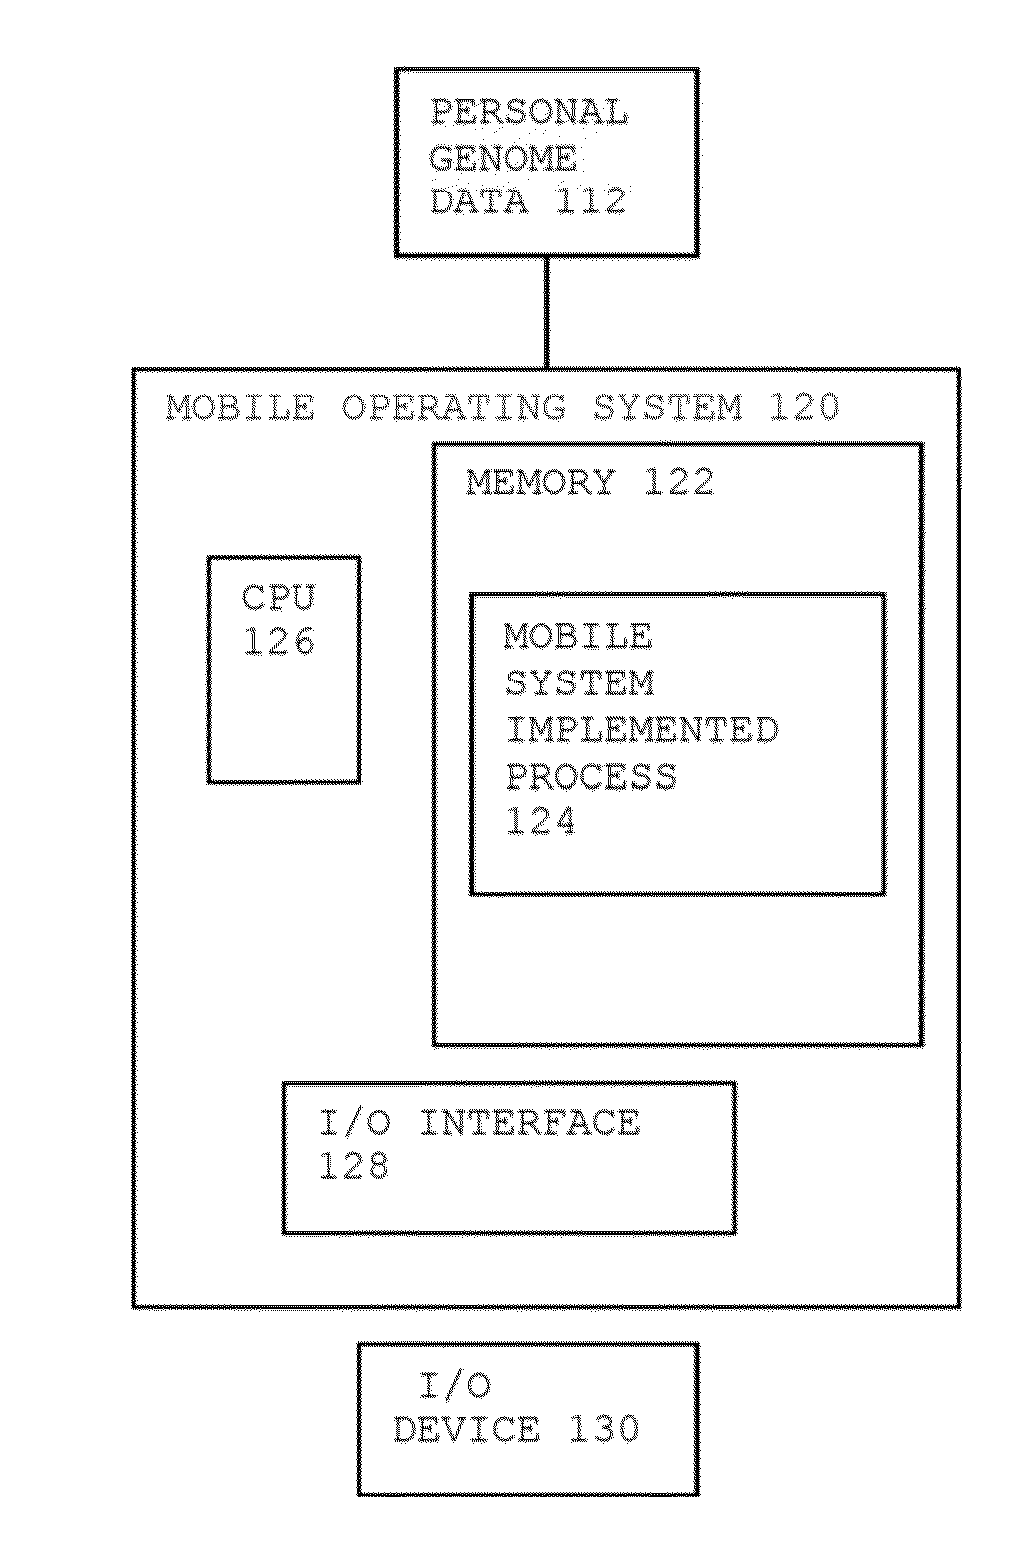 Method for Personal Genome Data Management